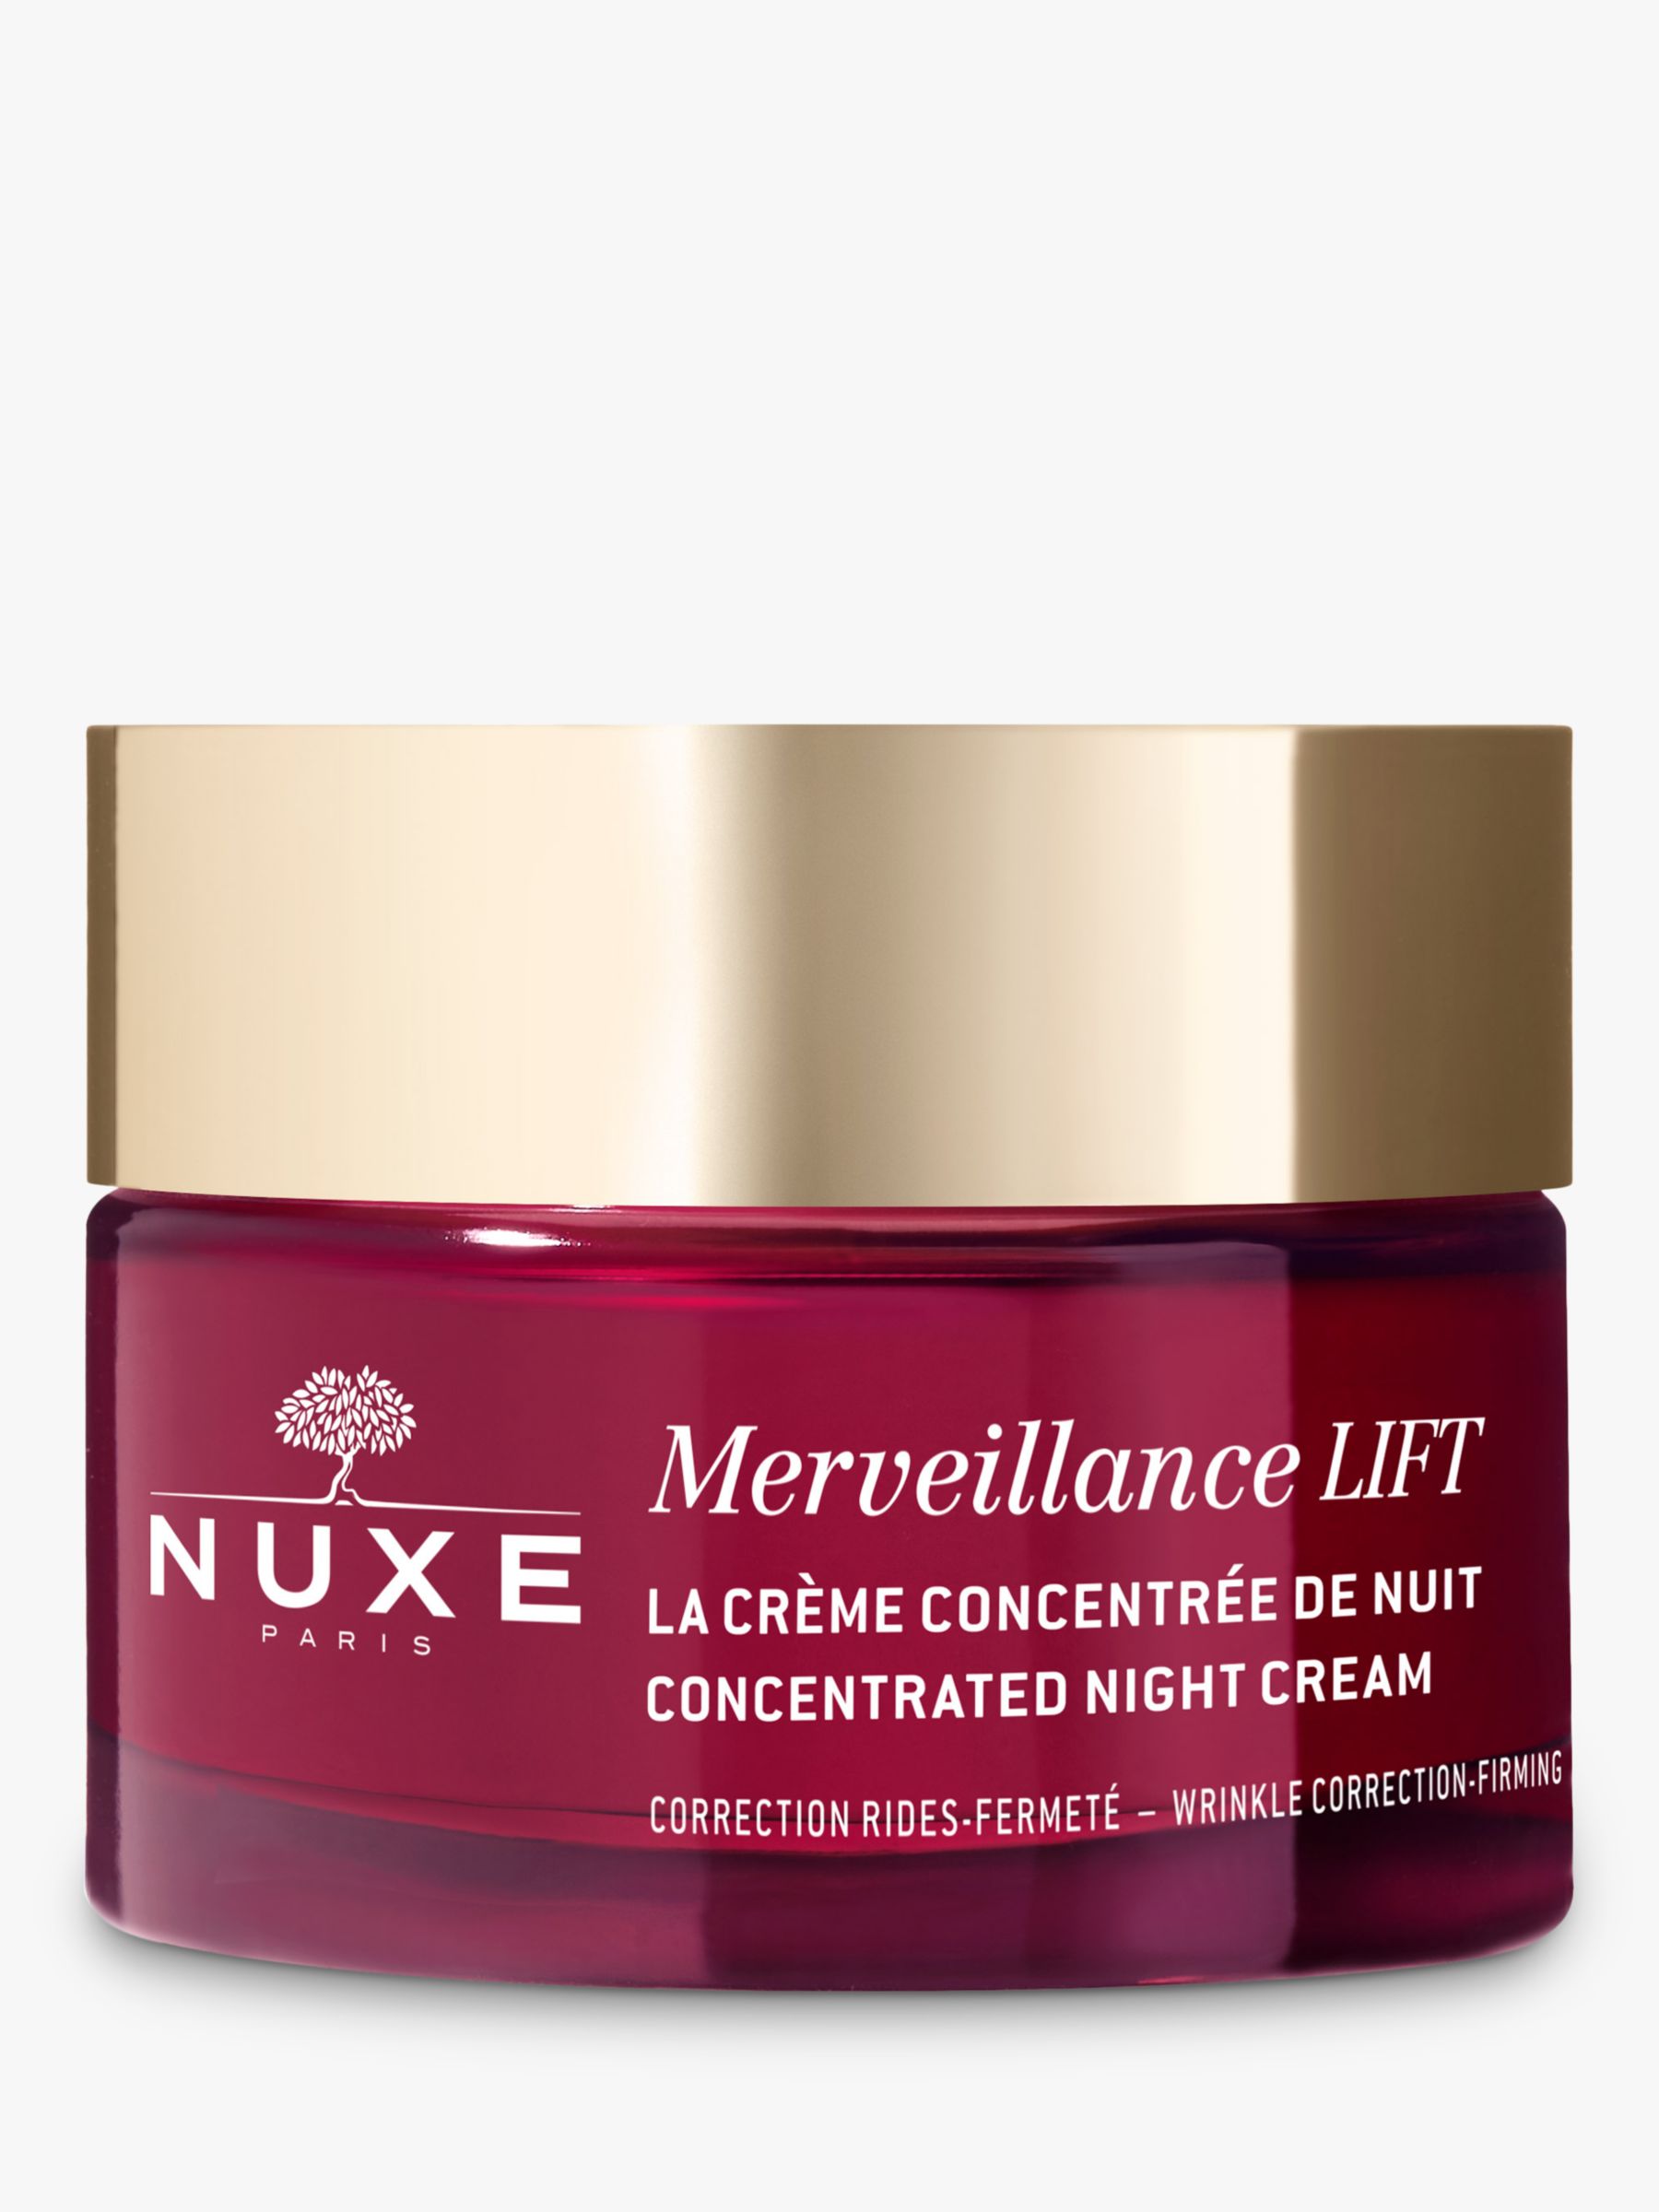 NUXE Merveillance® LIFT Concentrated Night Cream, 50ml 1